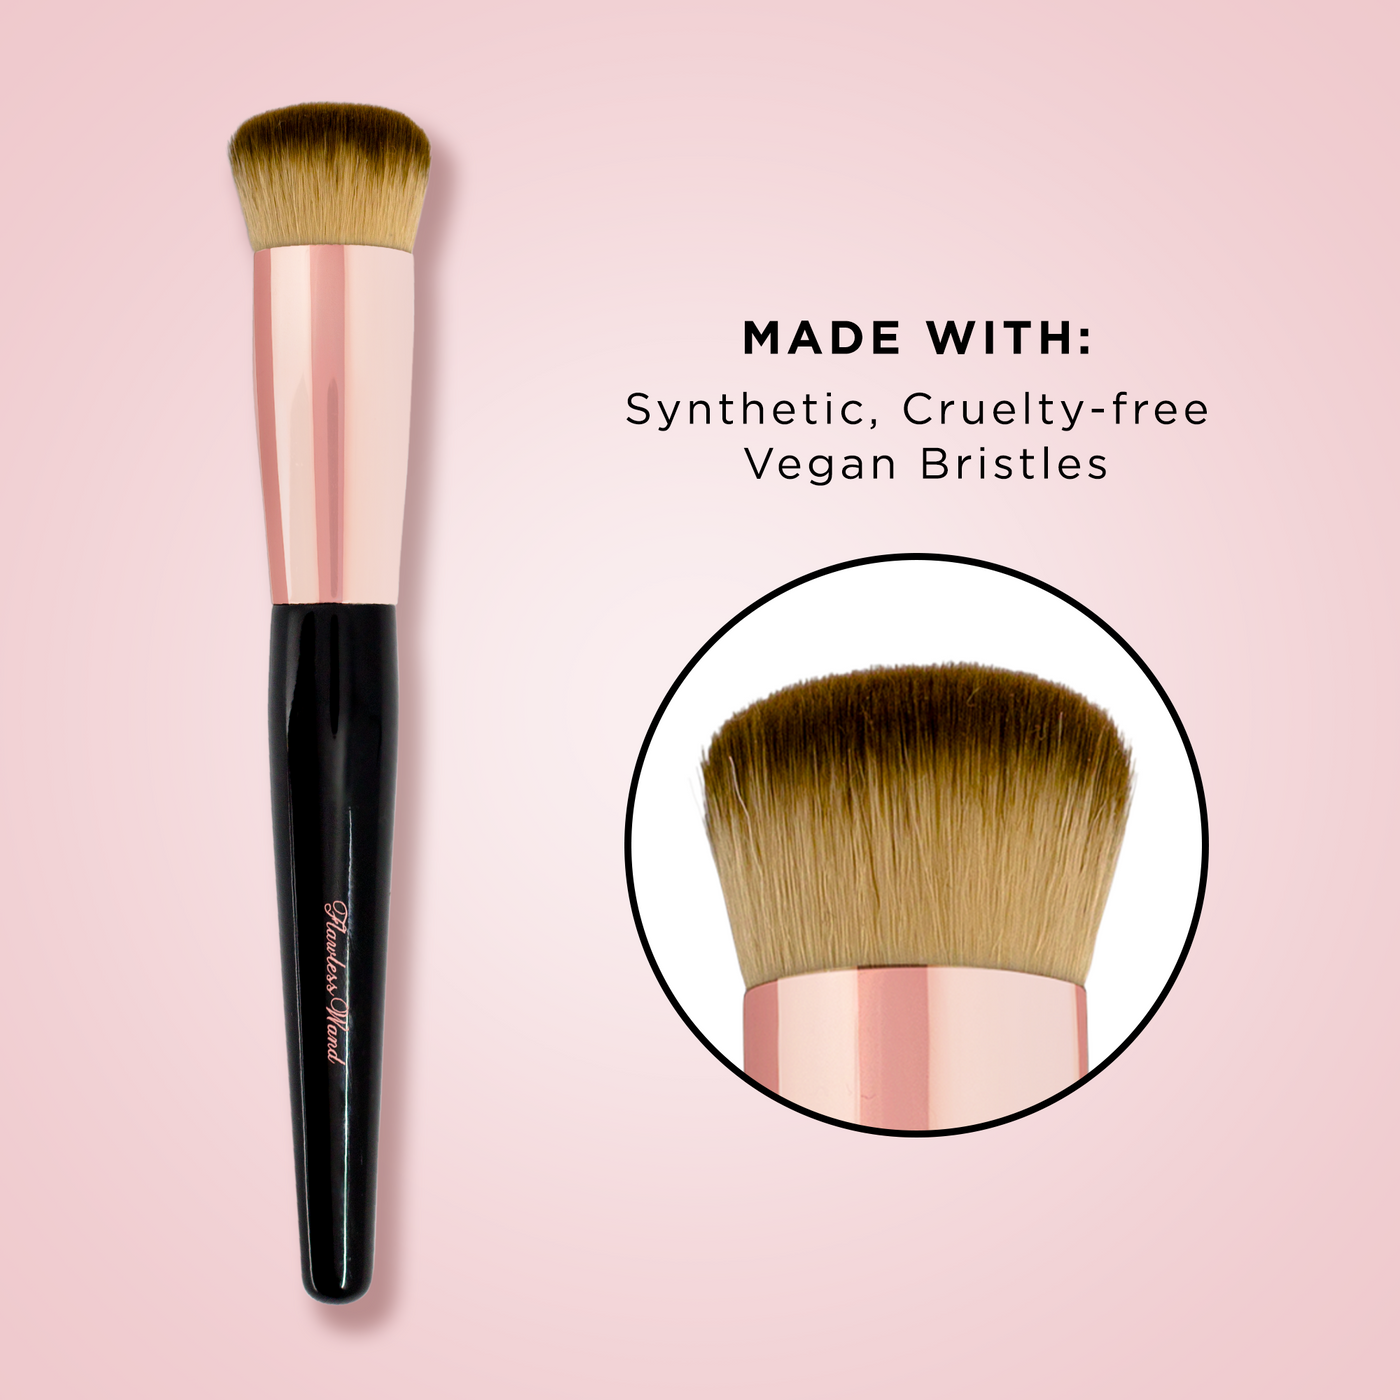 Flawless Wand Foundation Brush (MSRP $25)